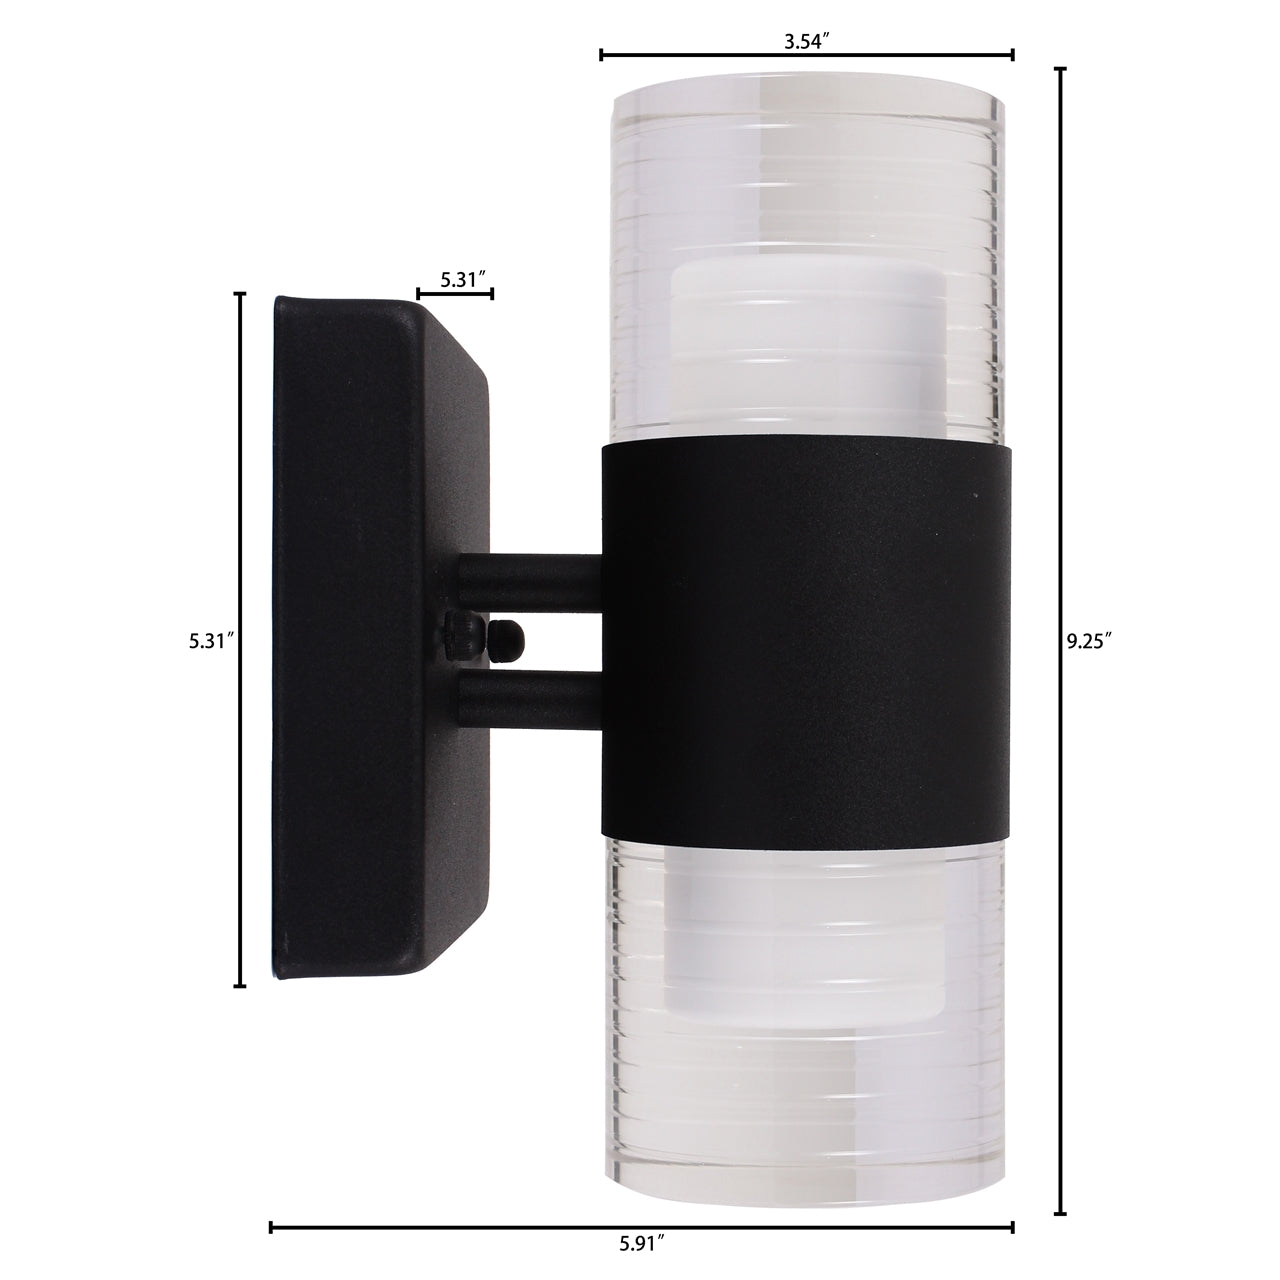 ANWAR 2 Light- LED Indoor/Outdoor Wall Sconce 3000K Warm White 10" Tall